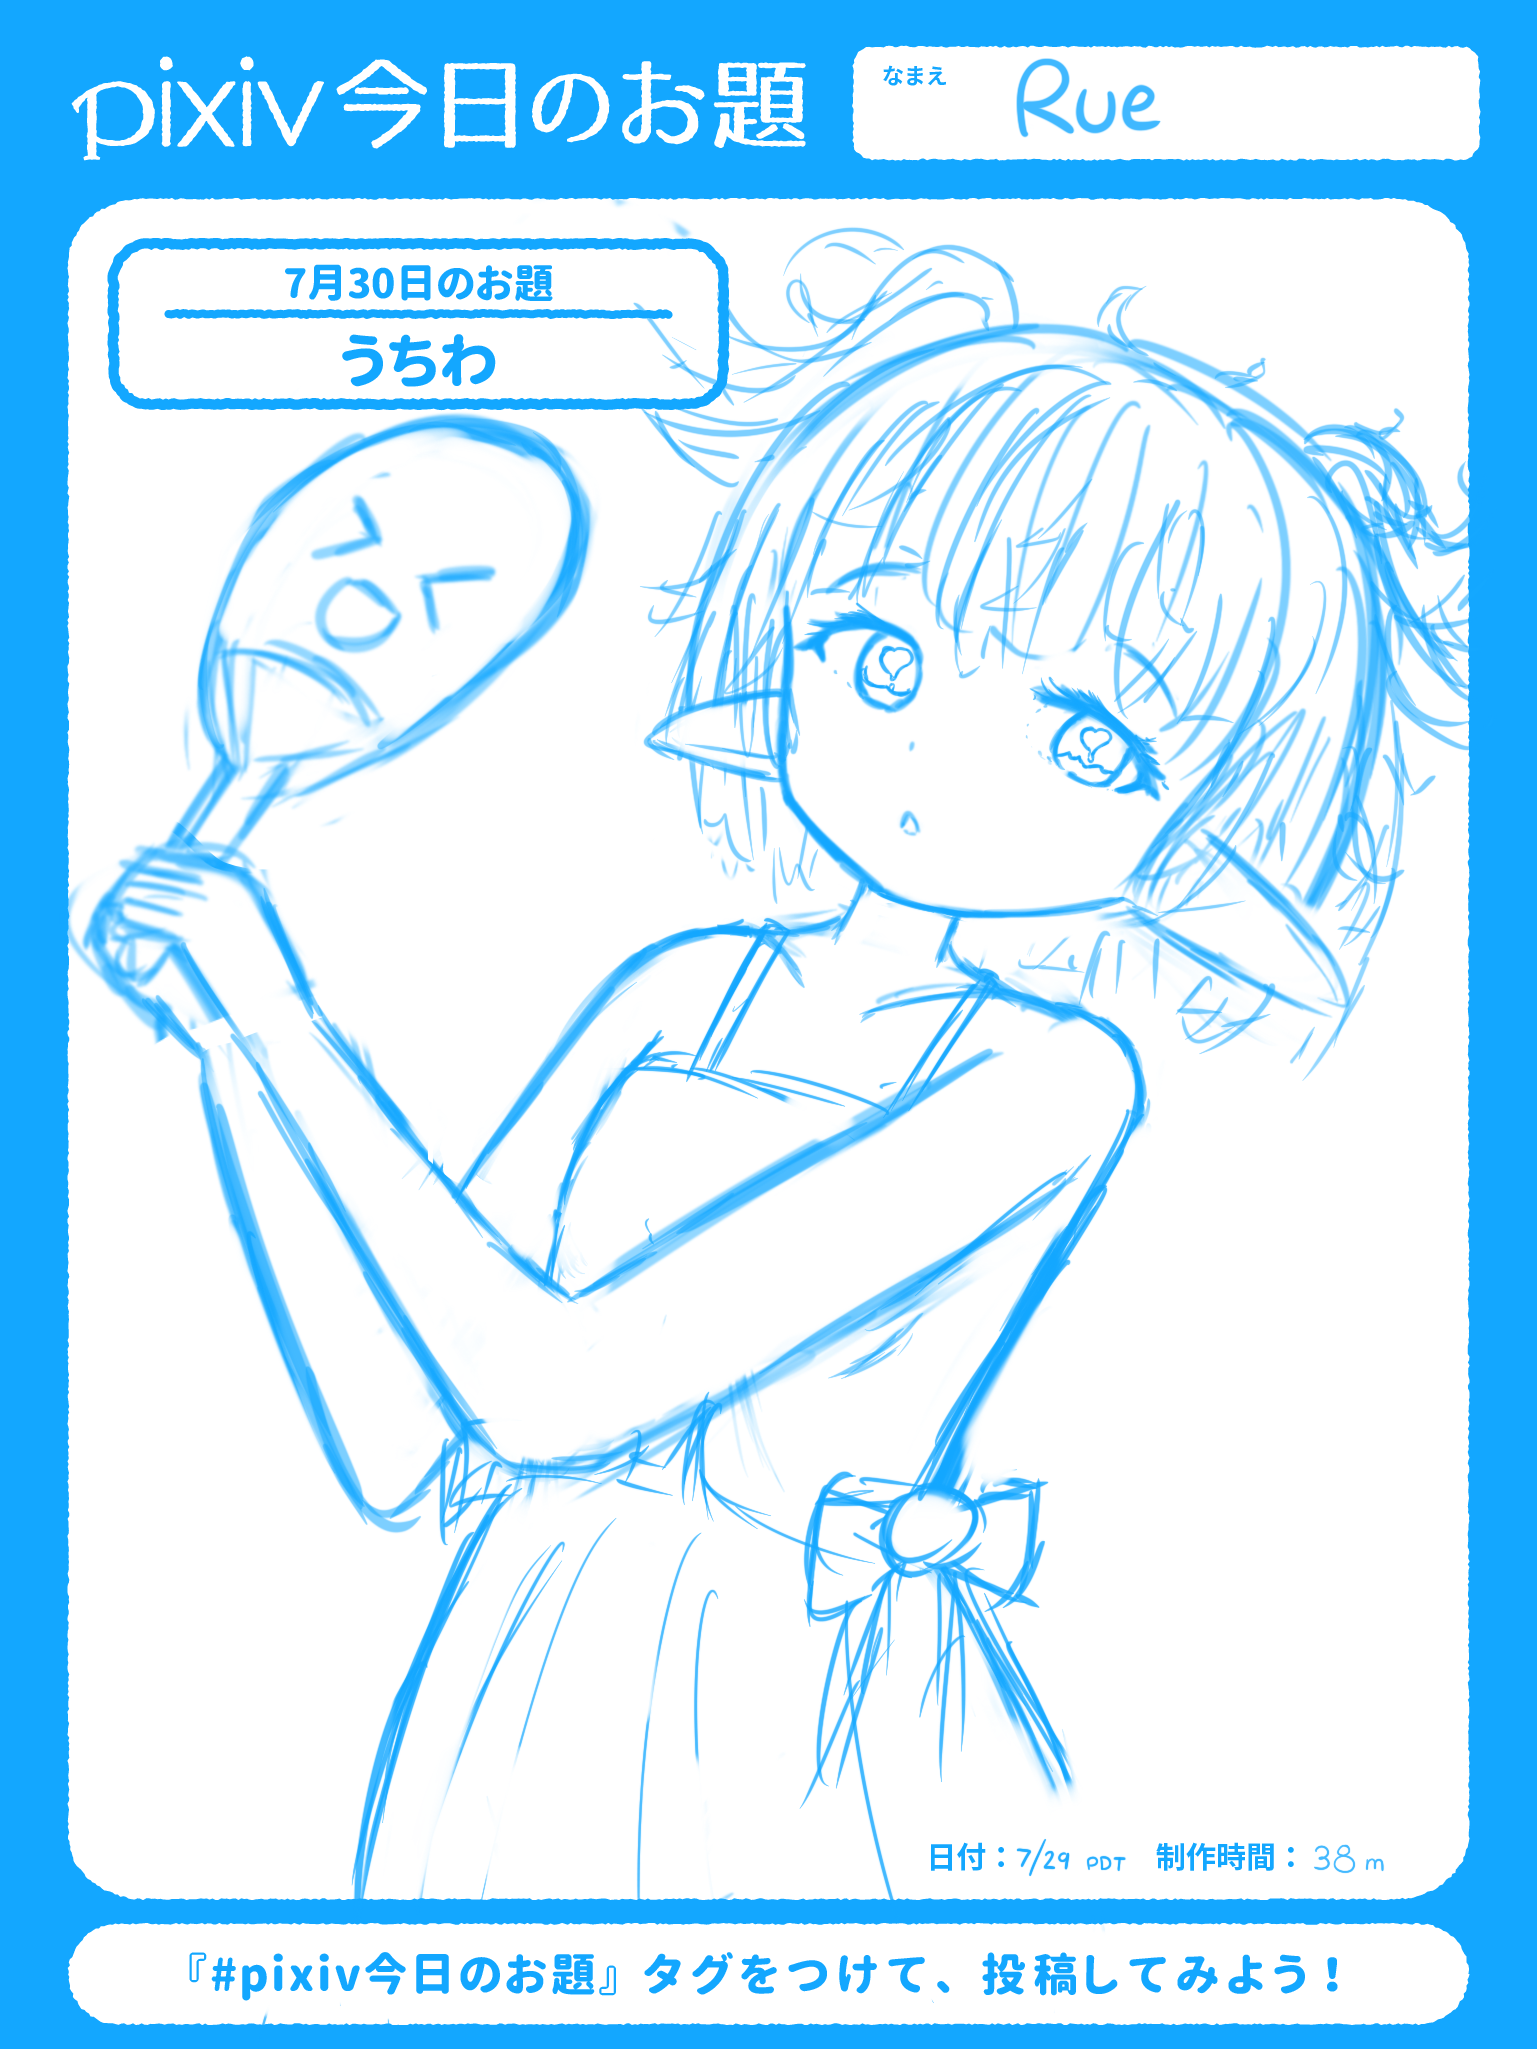 A sketch of me holding a fan! Today’s Pixiv Sensei theme was うちわ and I think that’s a type of fan at least…